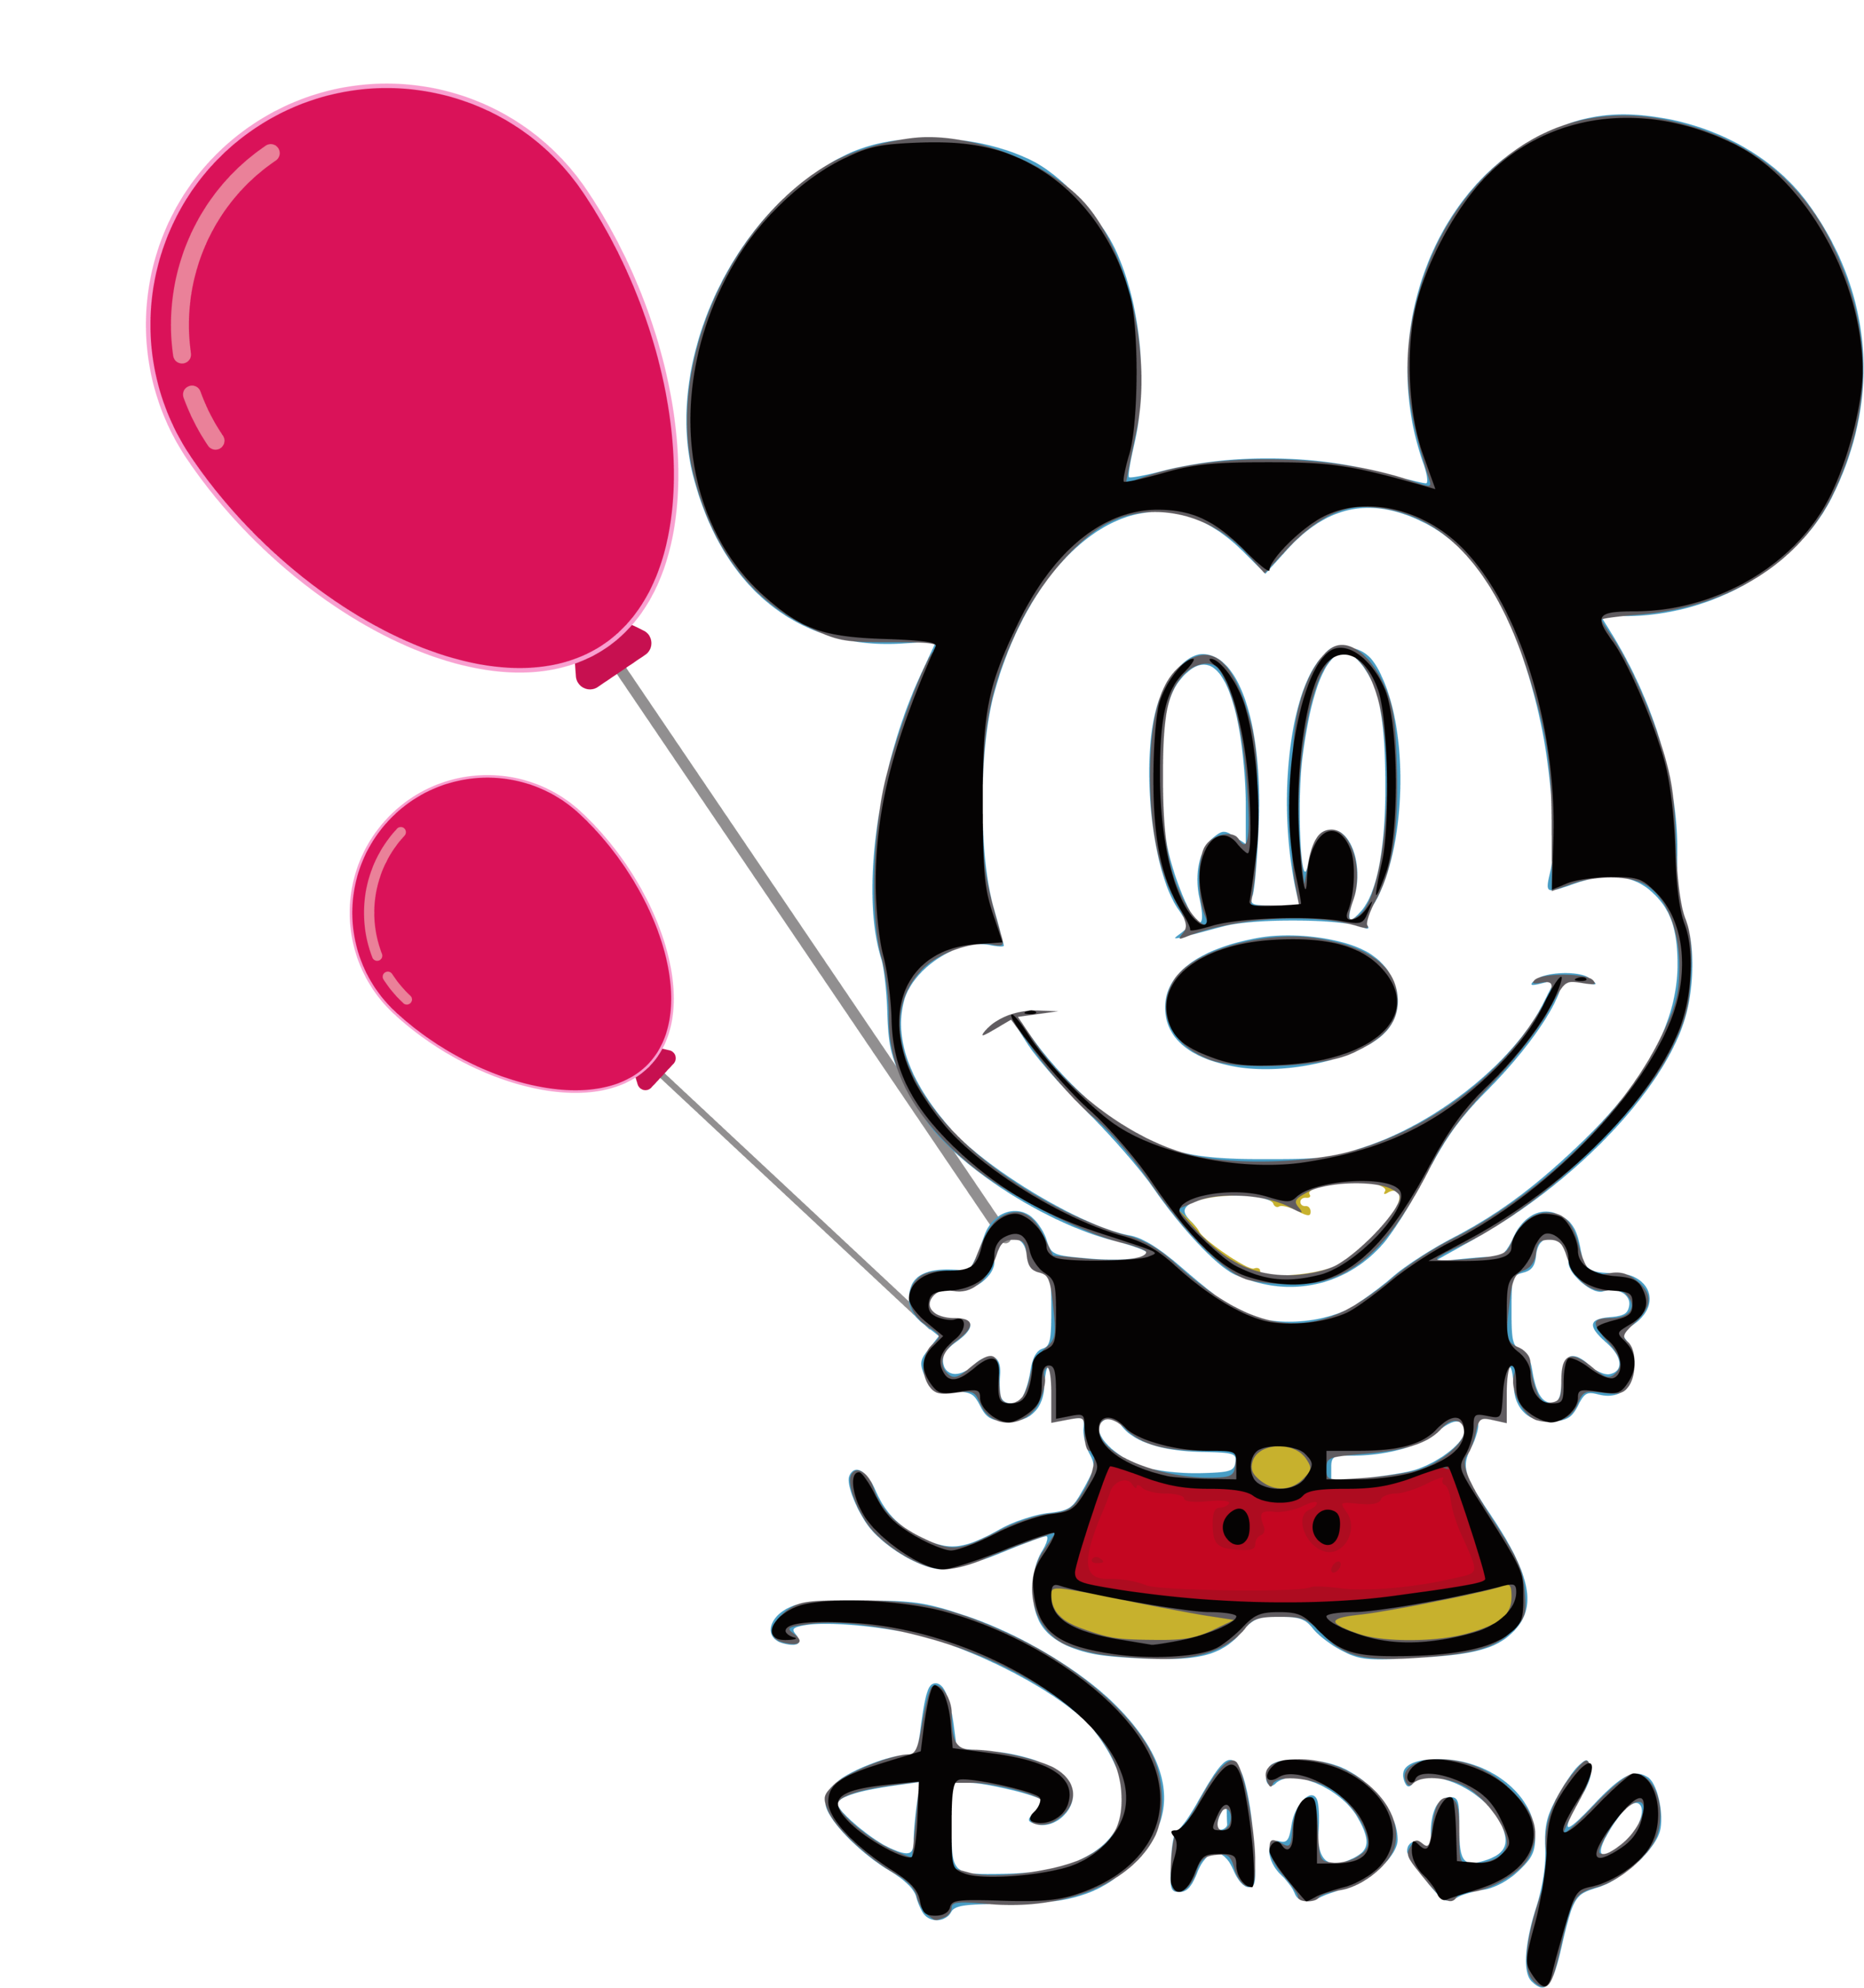 Lovely image birthday of Mickey Mouse with balloons.